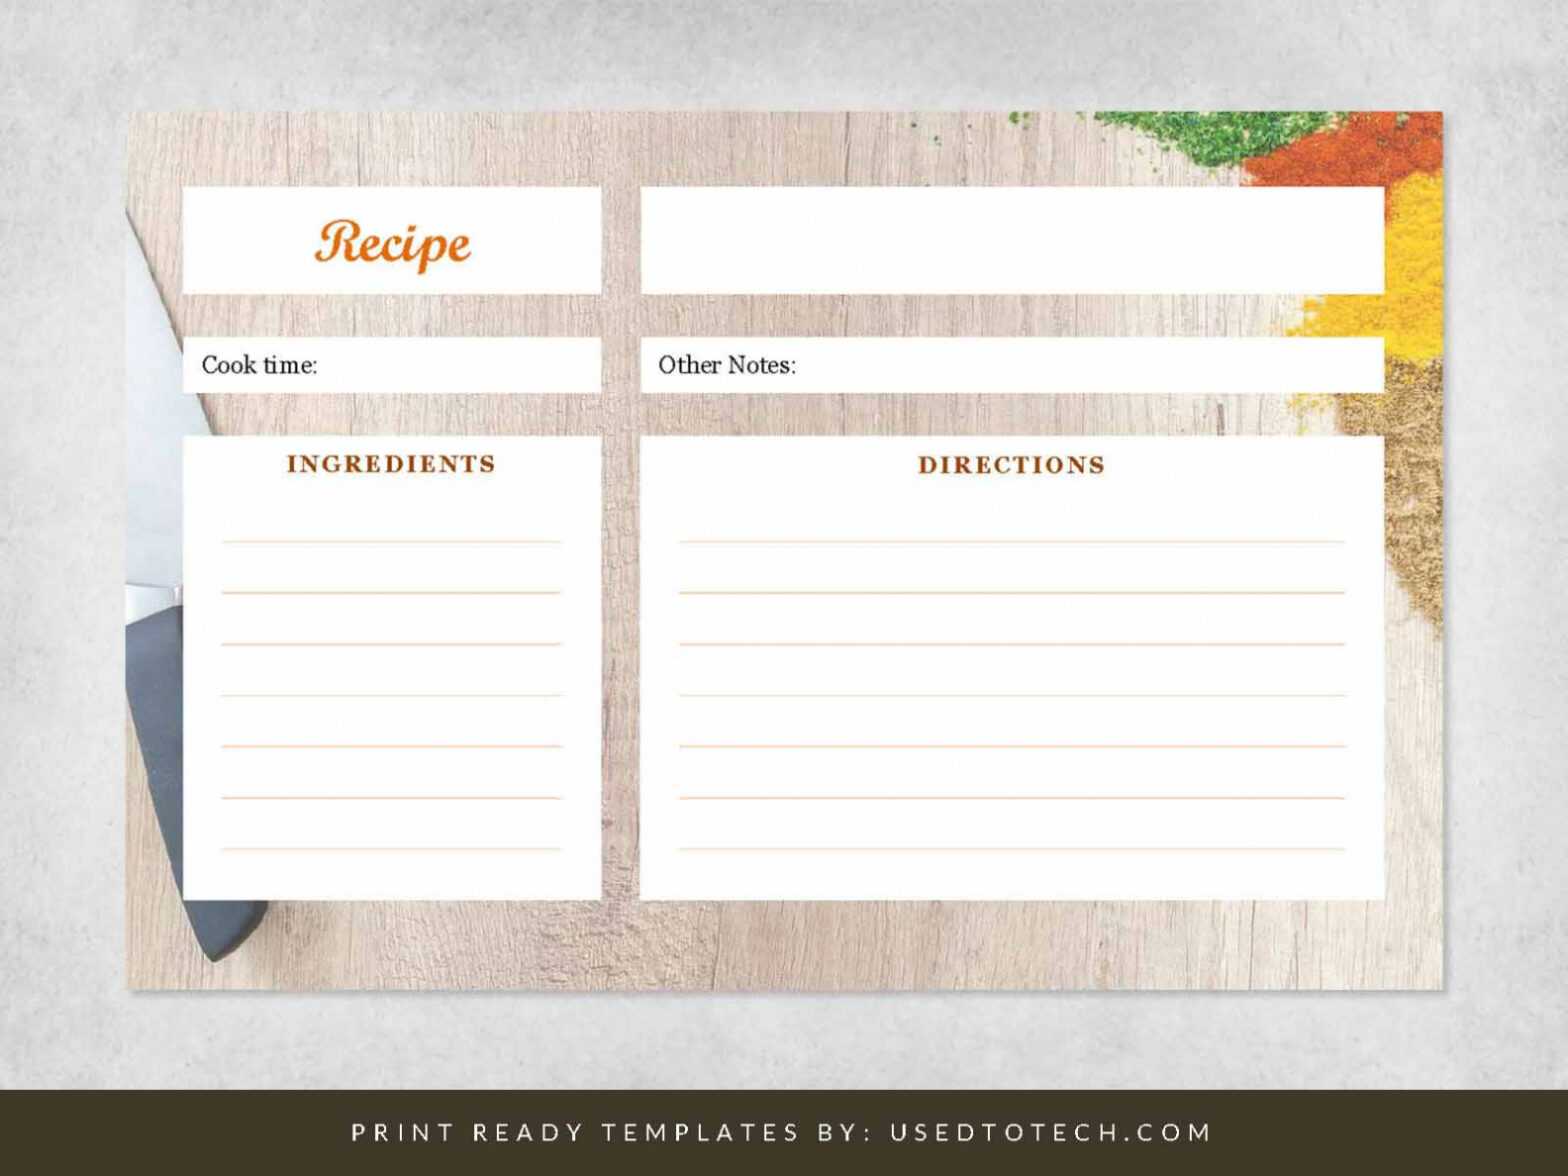 Fancy 4 X 6 Recipe Card Template For Word - Used To Tech intended for Free Recipe Card Templates For Microsoft Word